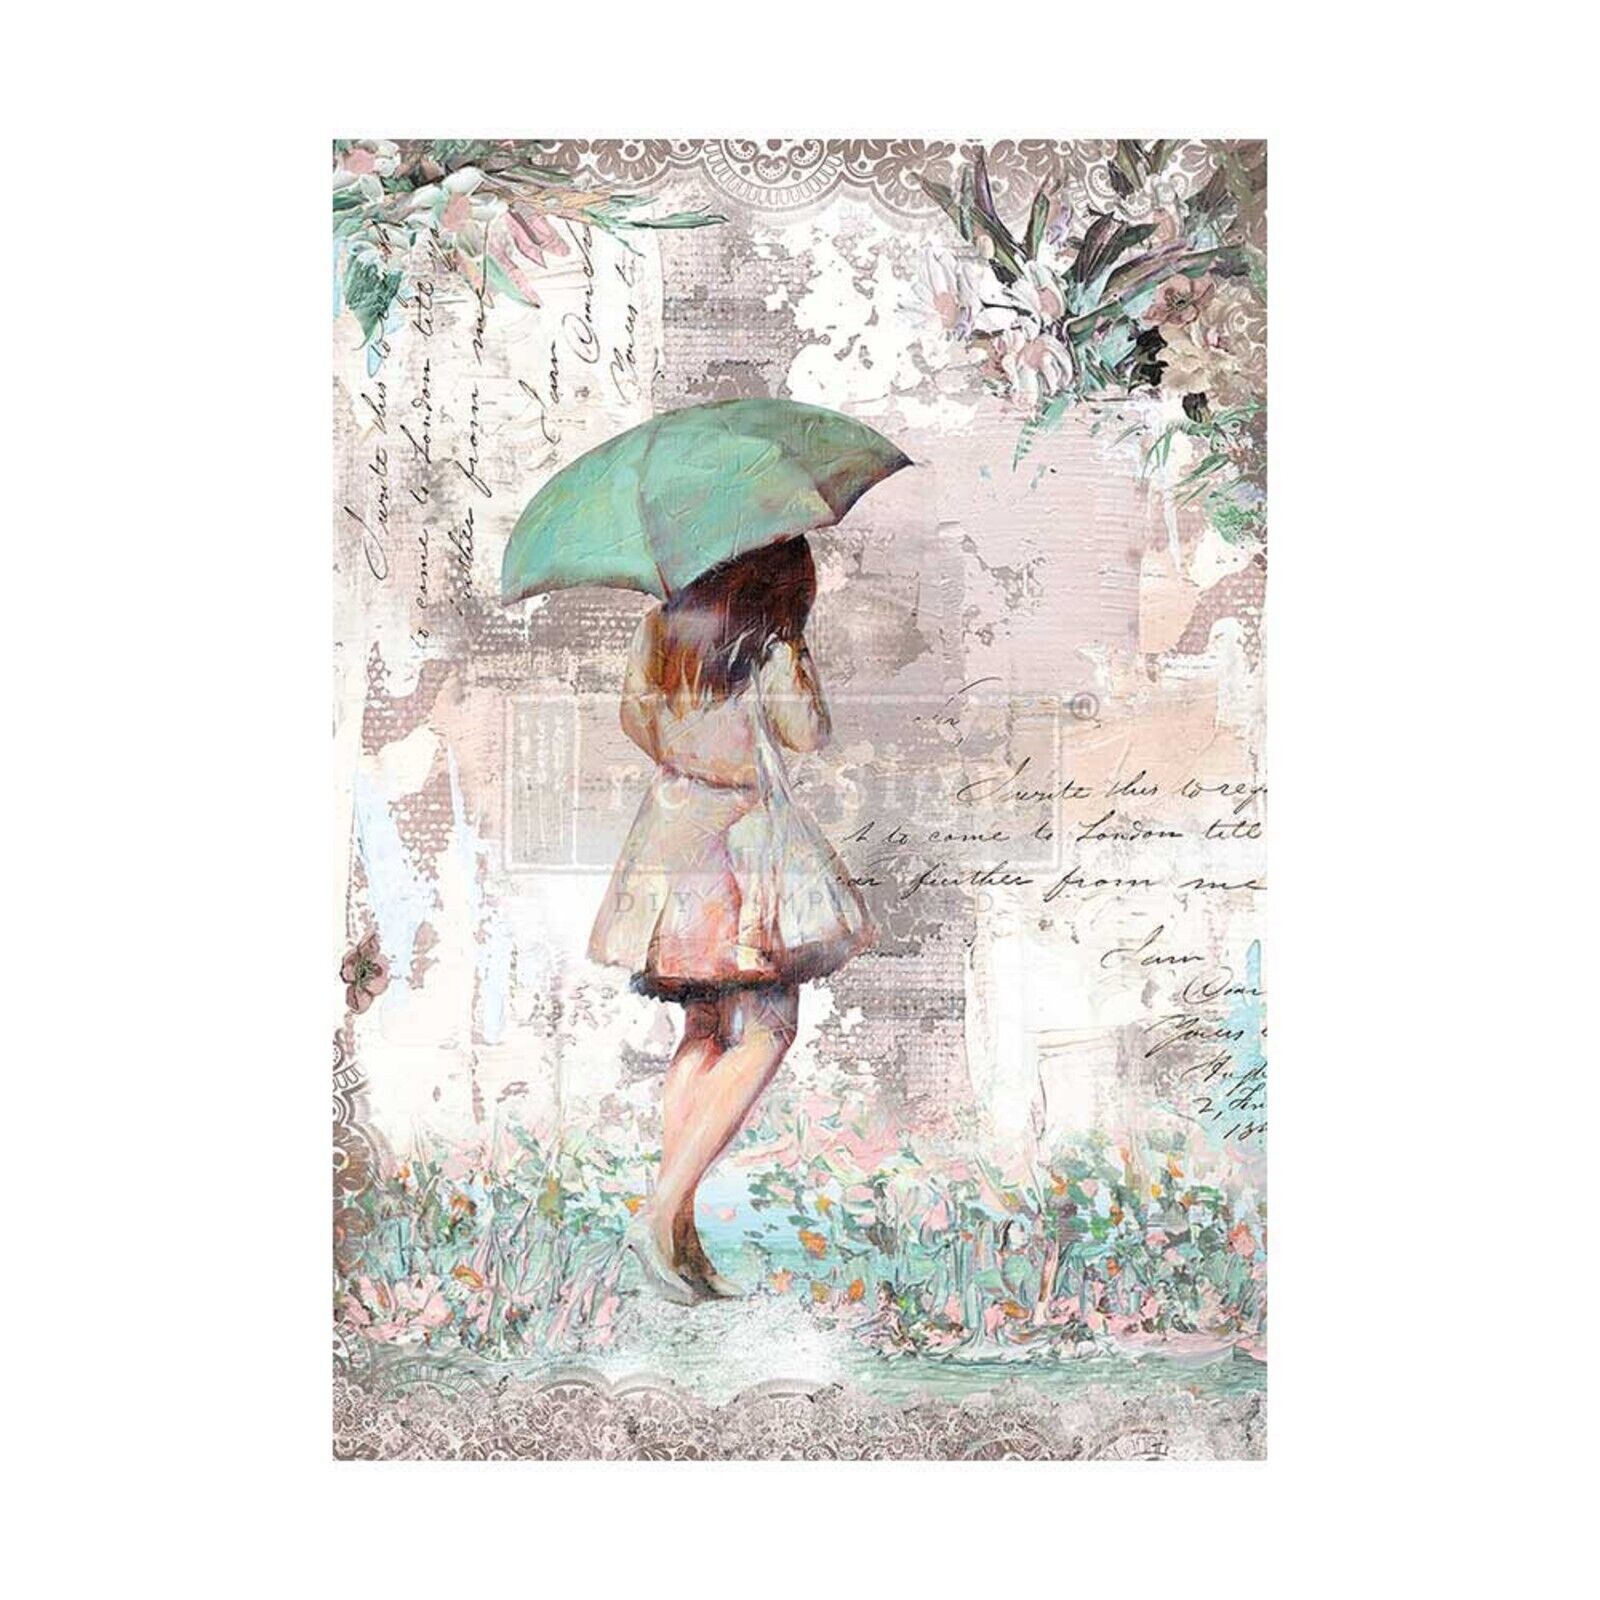 Redesign With Prima Rainy Afternoon A1 Fiber Paper For Decoupage, 23.4x33.1 In